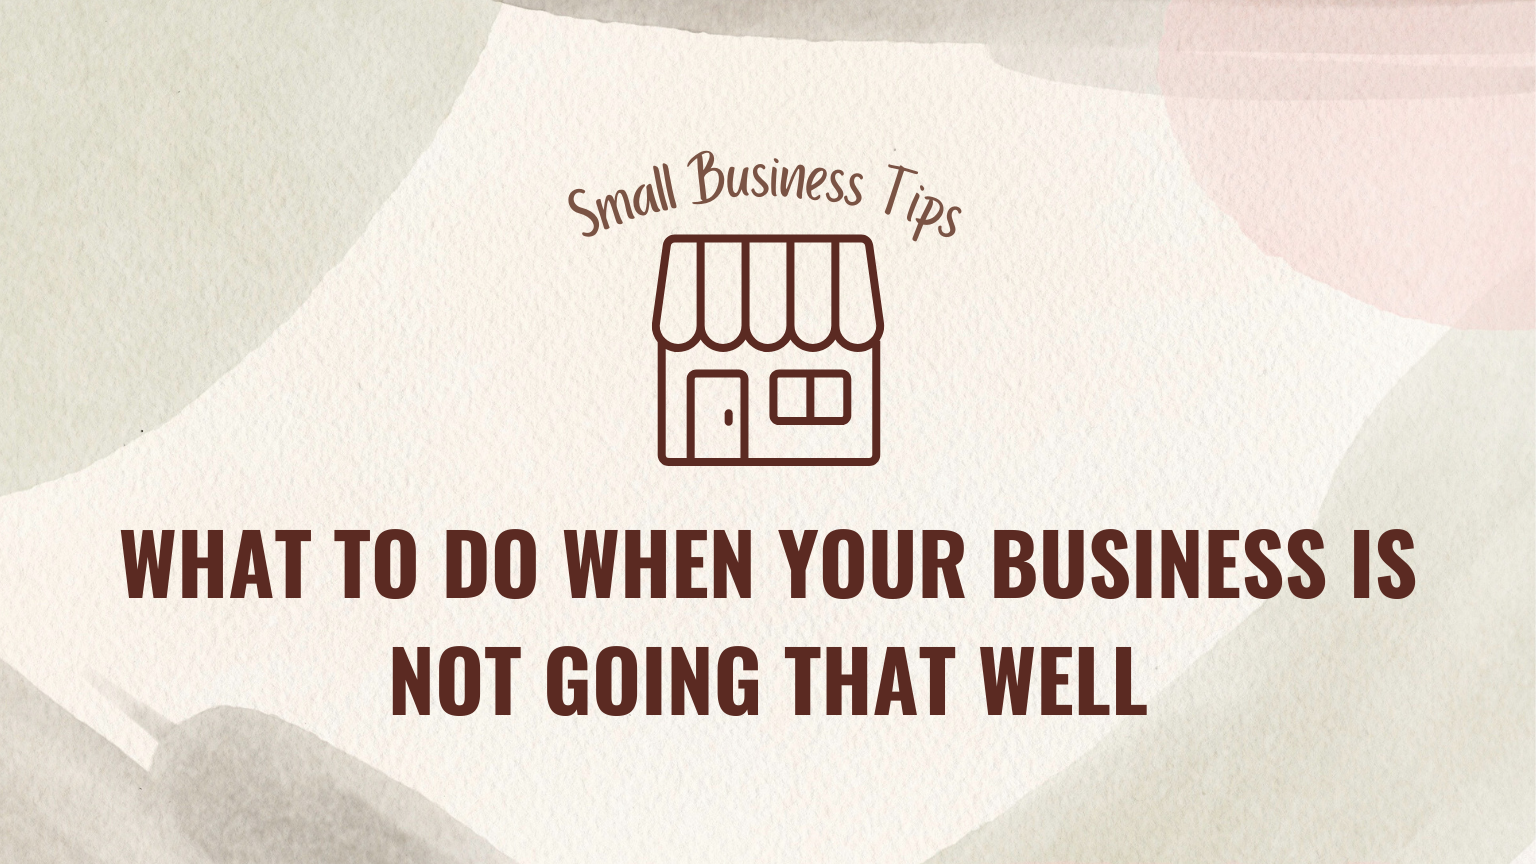 Small Business Tips – What to do when your business is not going well